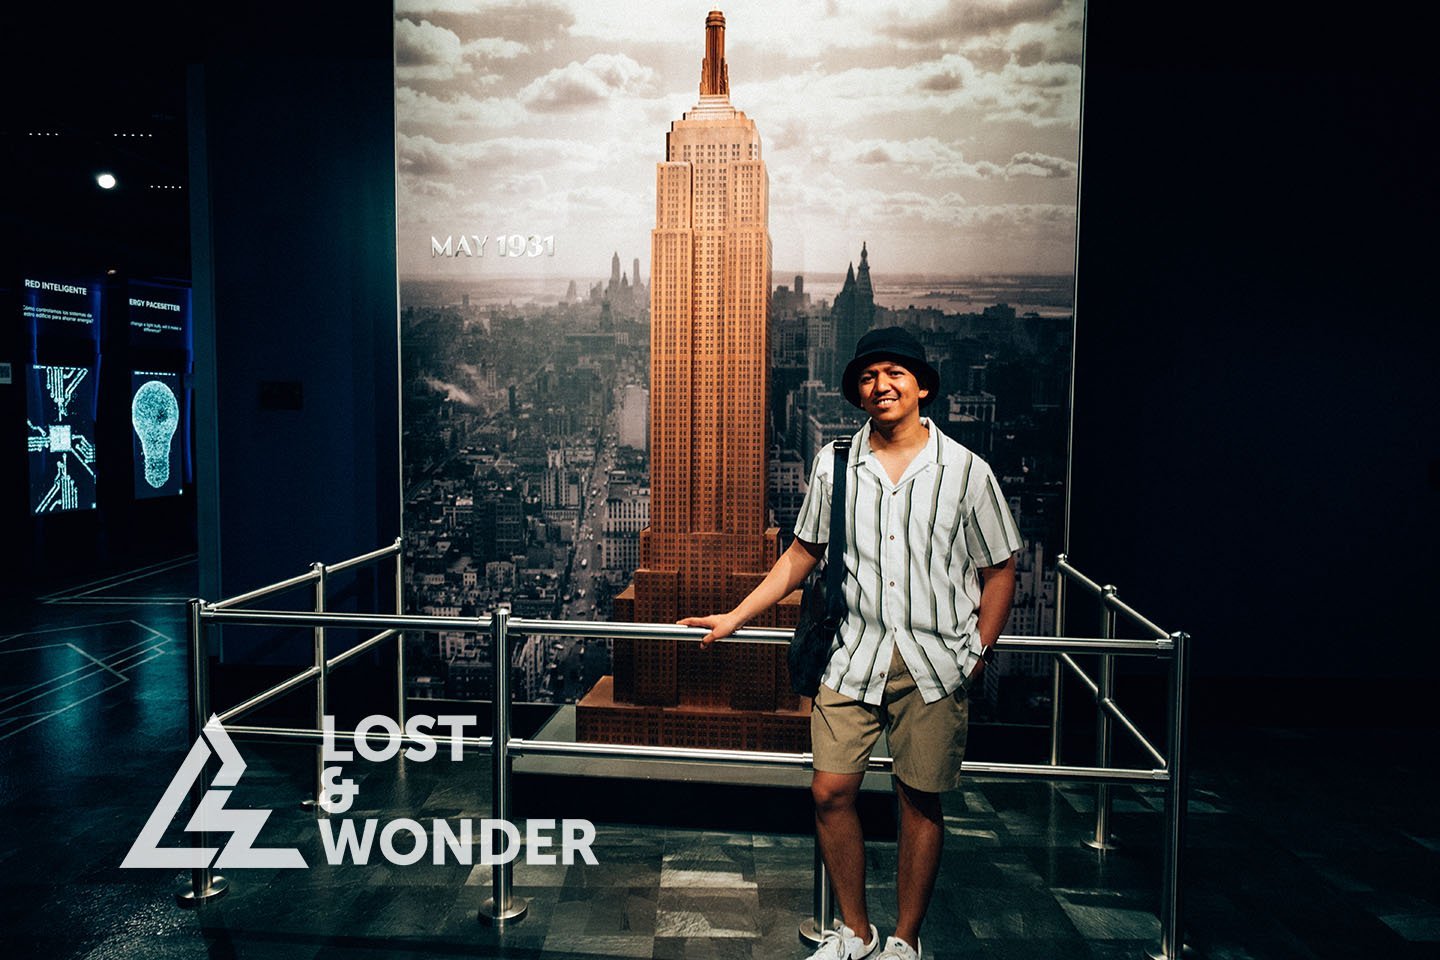 Photo taken inside the exhibits and gallery of the Empire State Building in New York